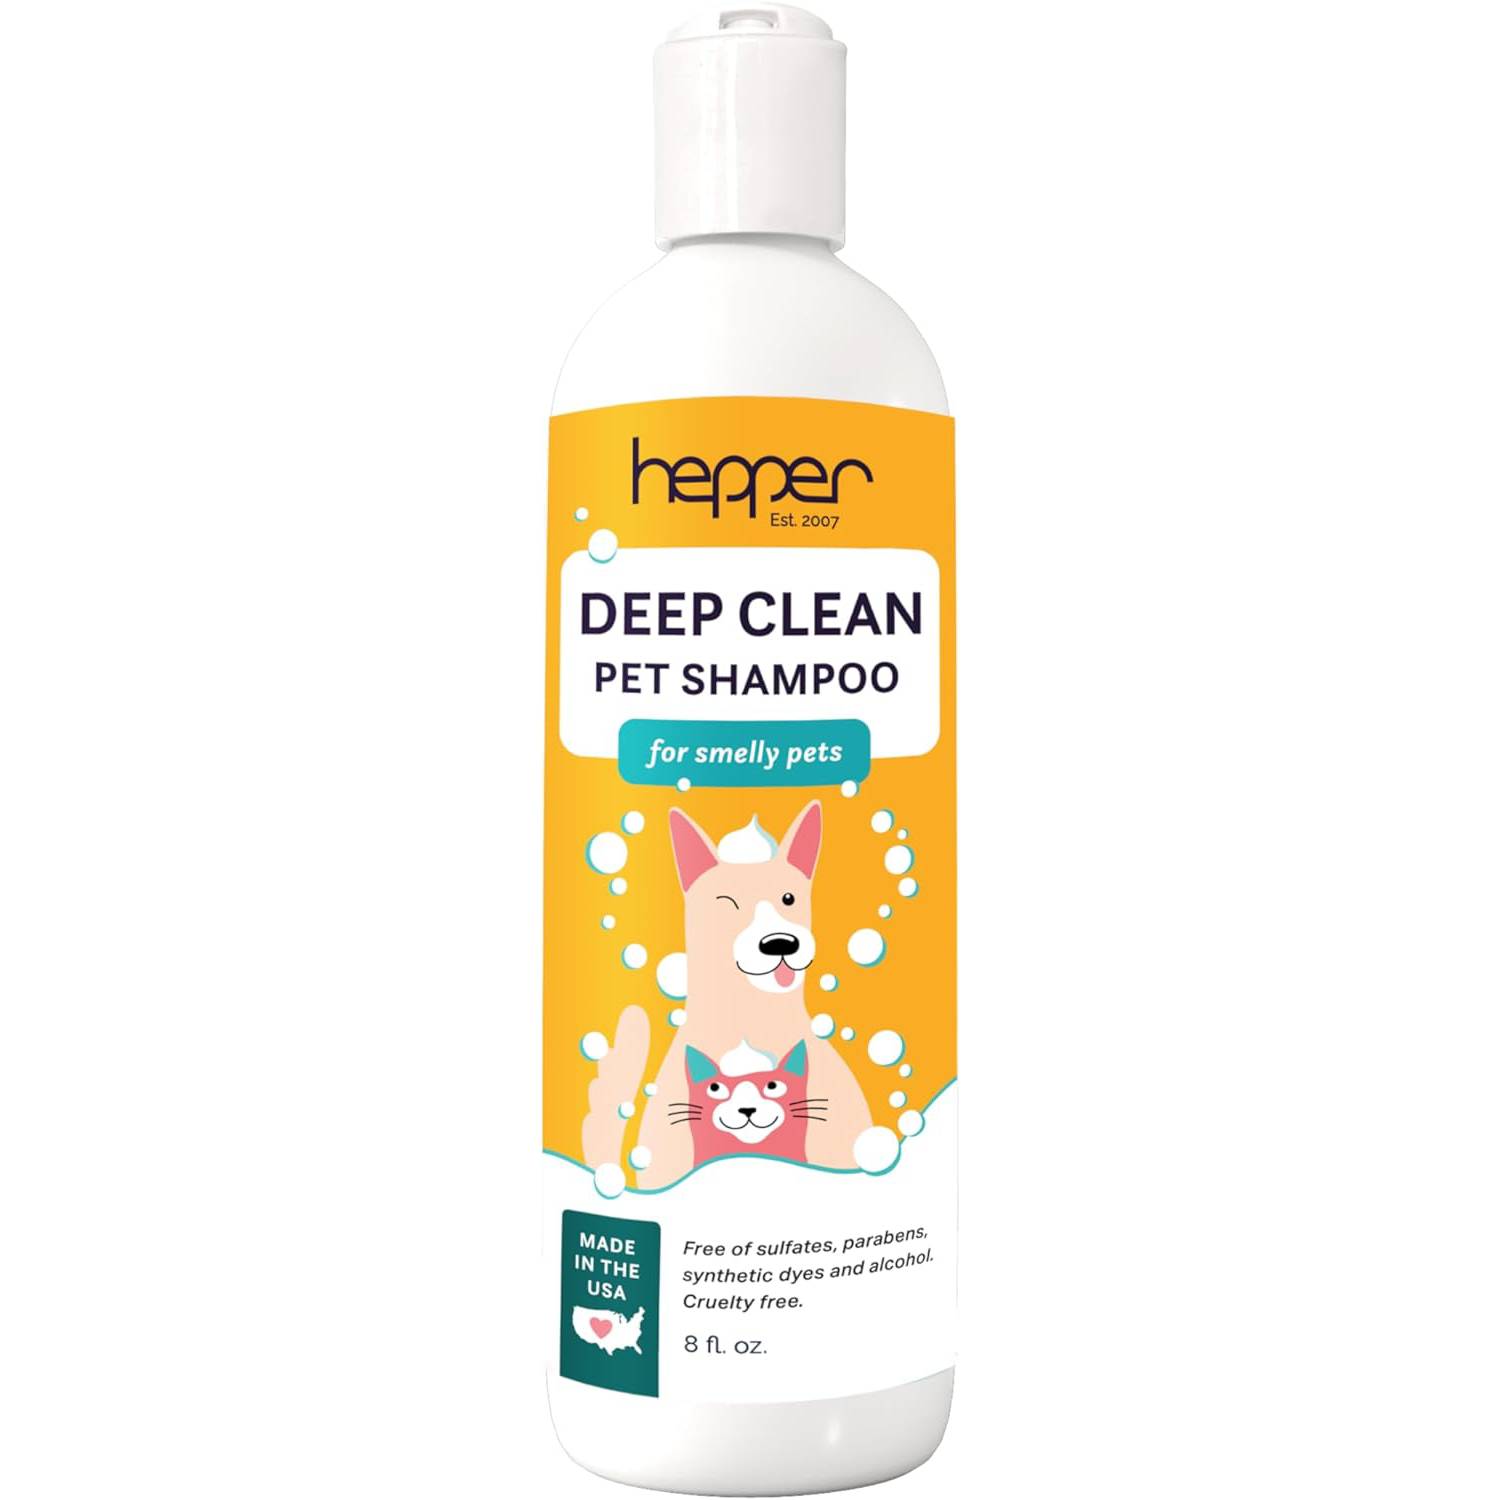 Hepper Deep Clean Pet Shampoo for Smelly Pets 